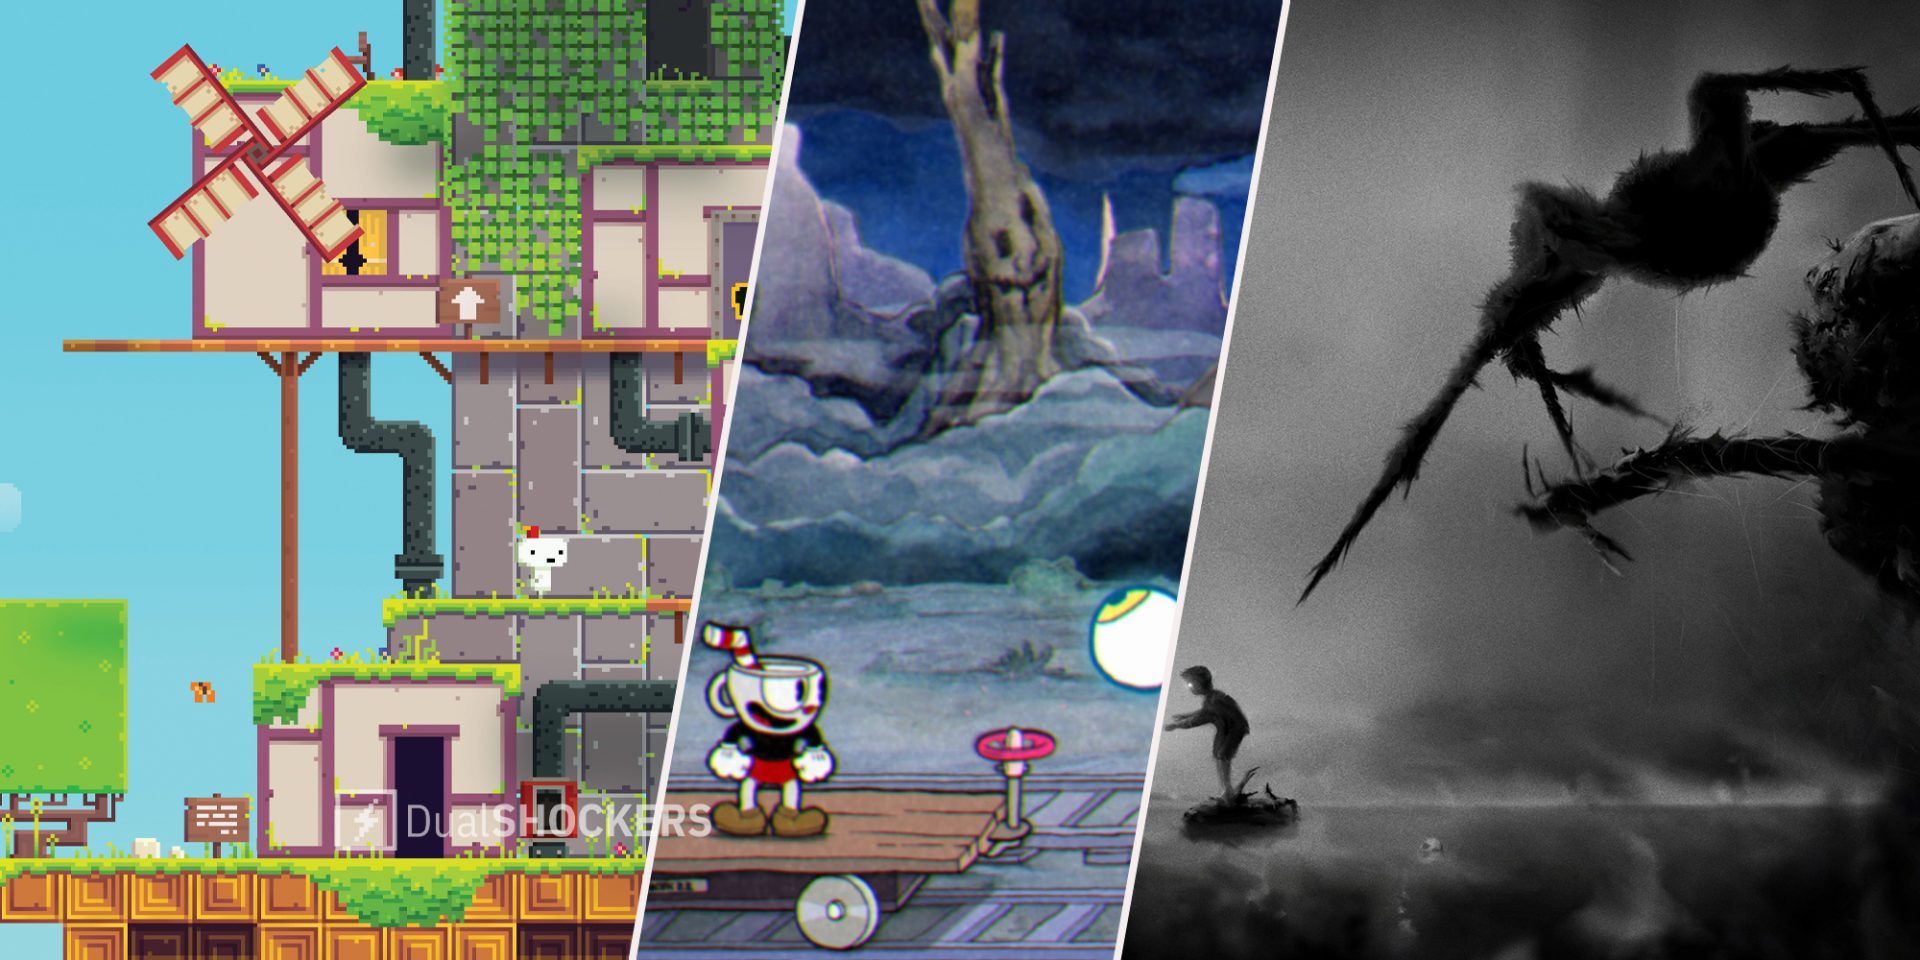 Fez on left, Cuphead in middle, Limbo on right